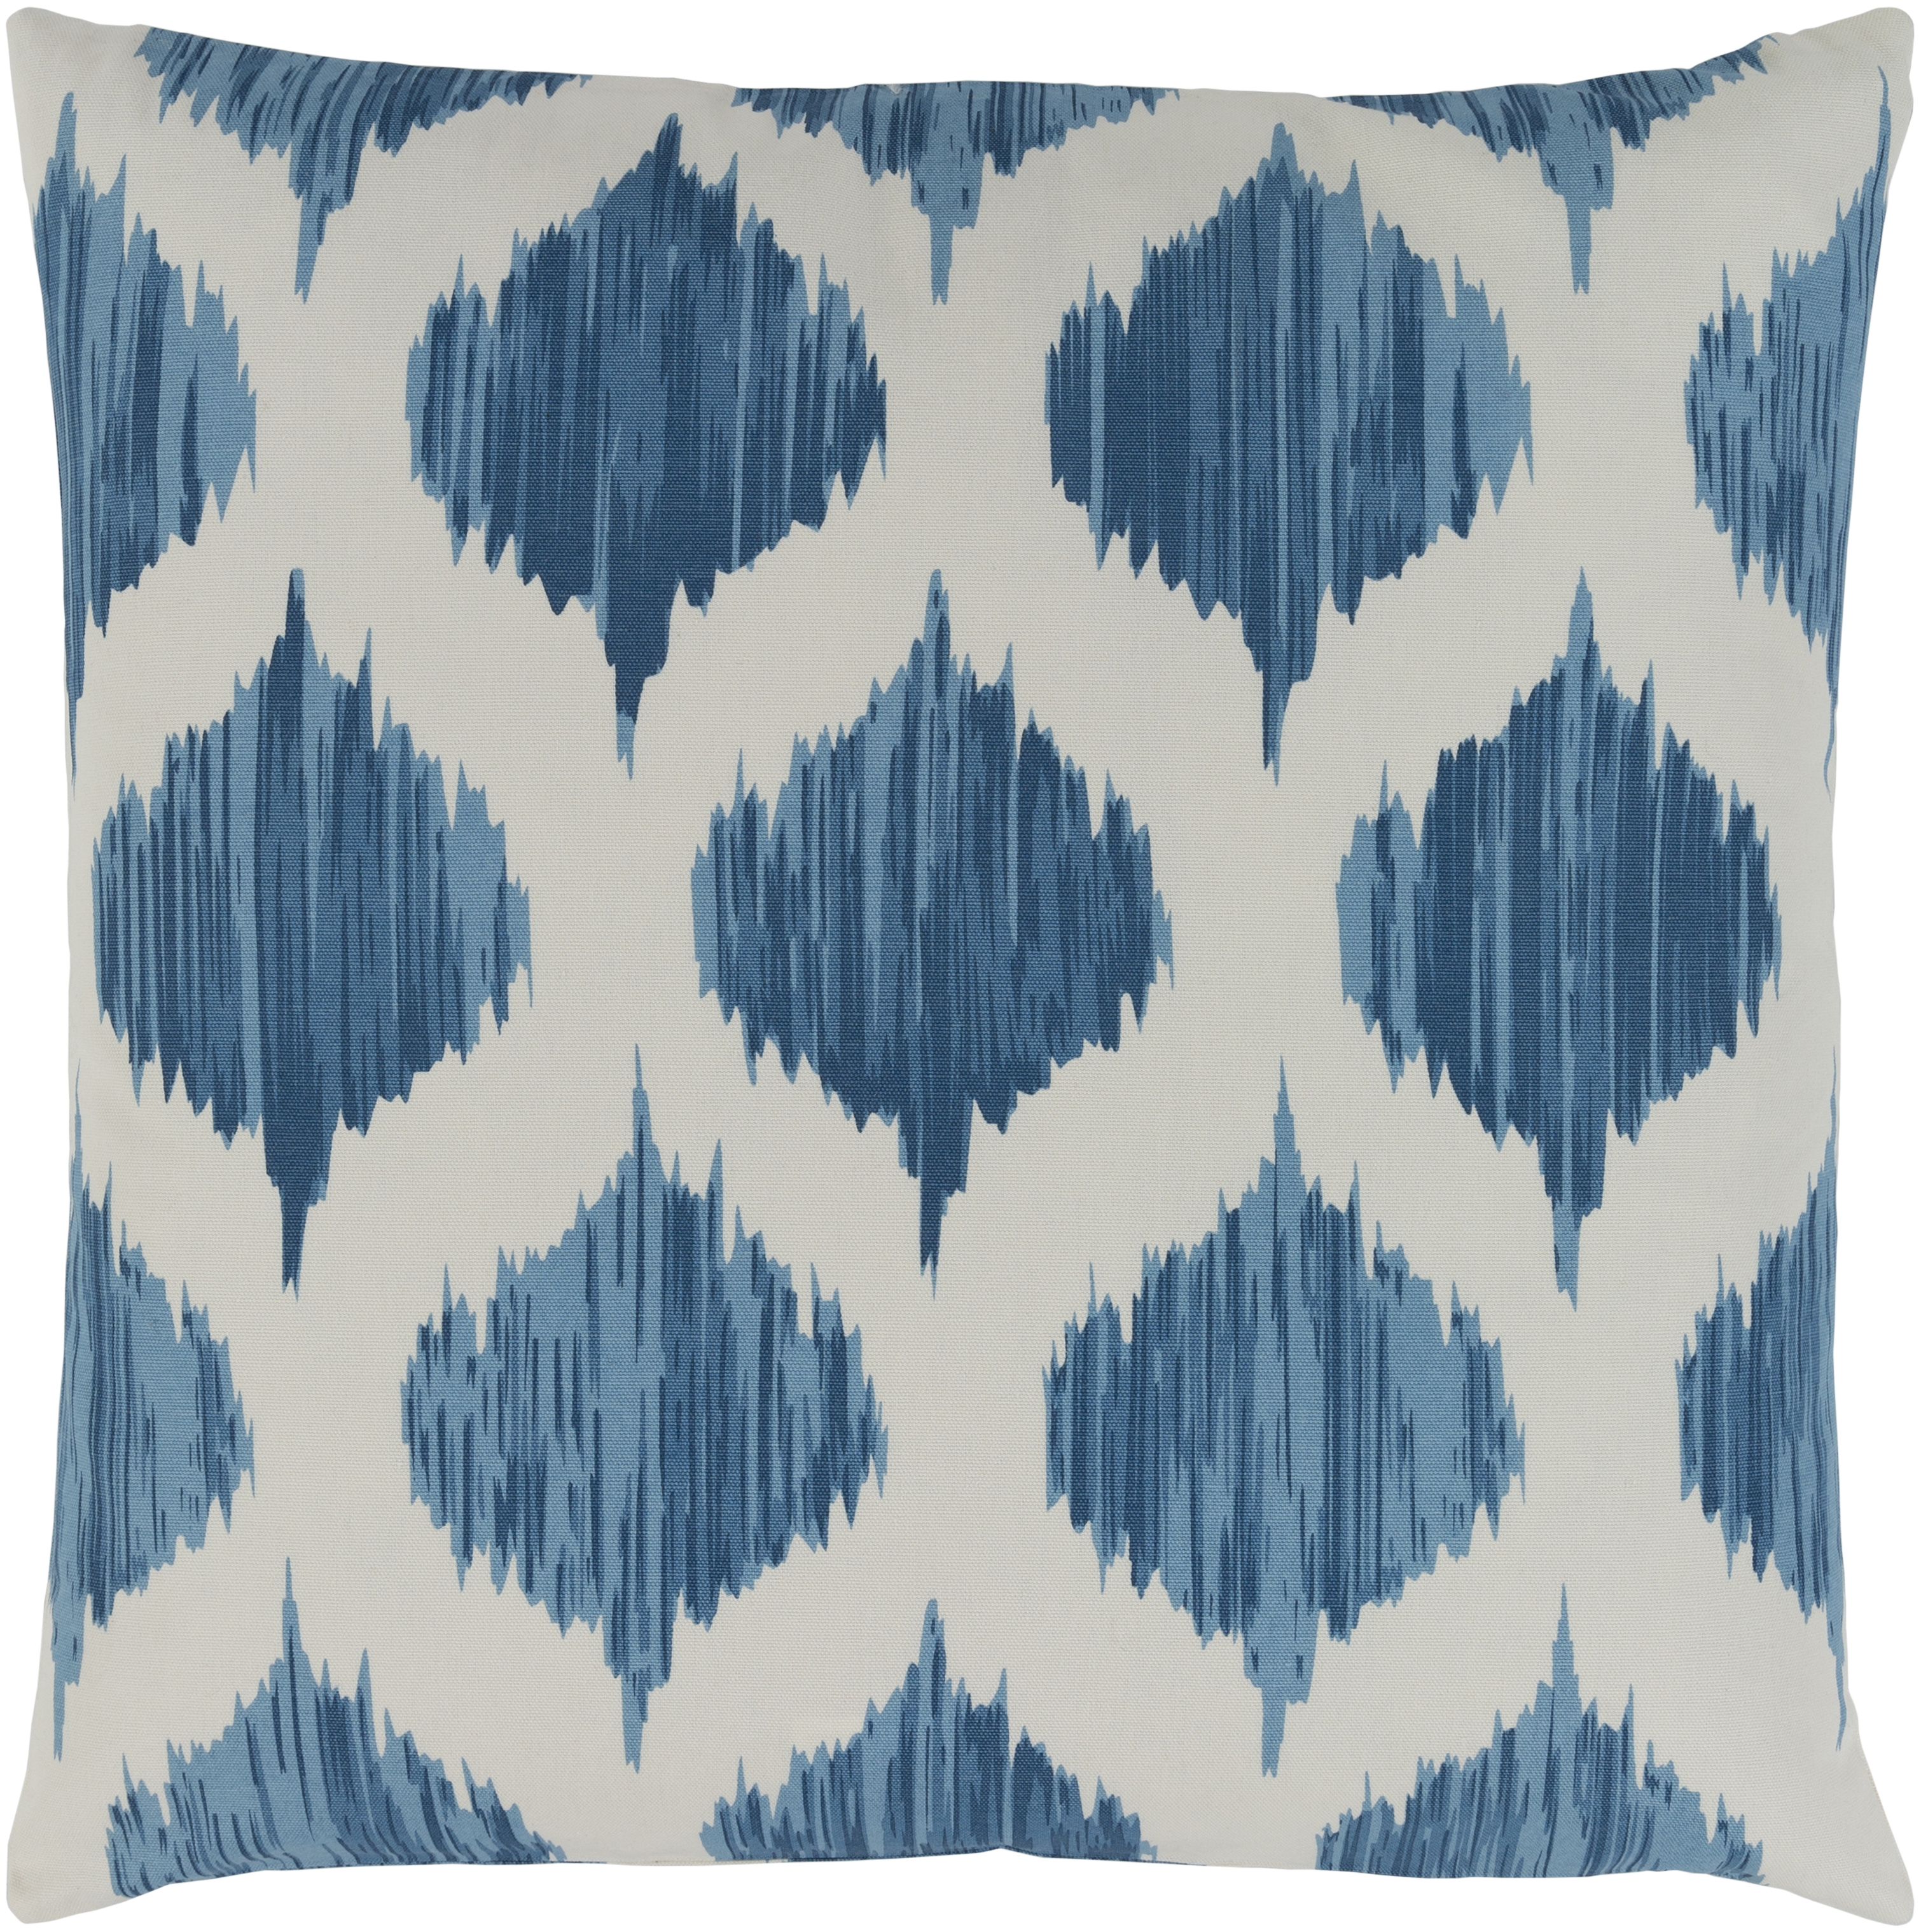 Ogee Throw Pillow, 18" x 18", with down insert - Image 0